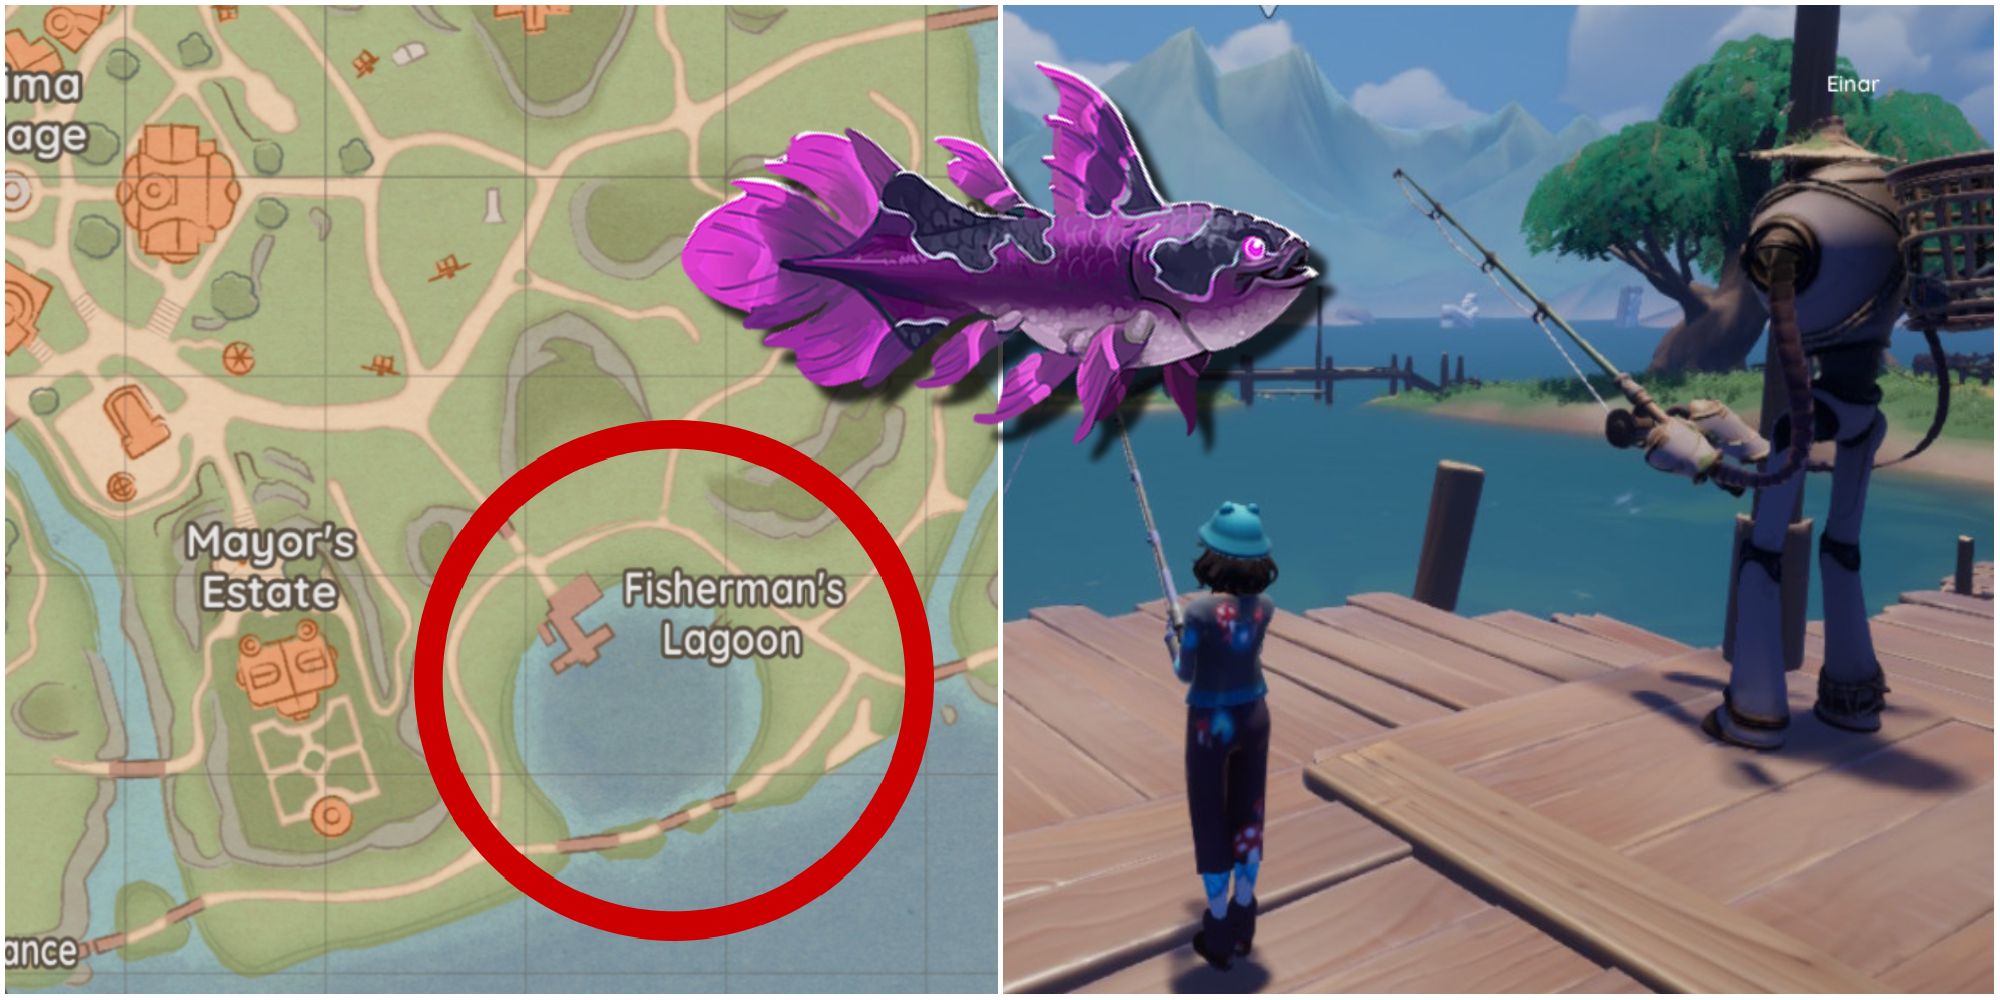 A map highlighting the Fisherman's Lagoon and a character fishing with Einar in this location